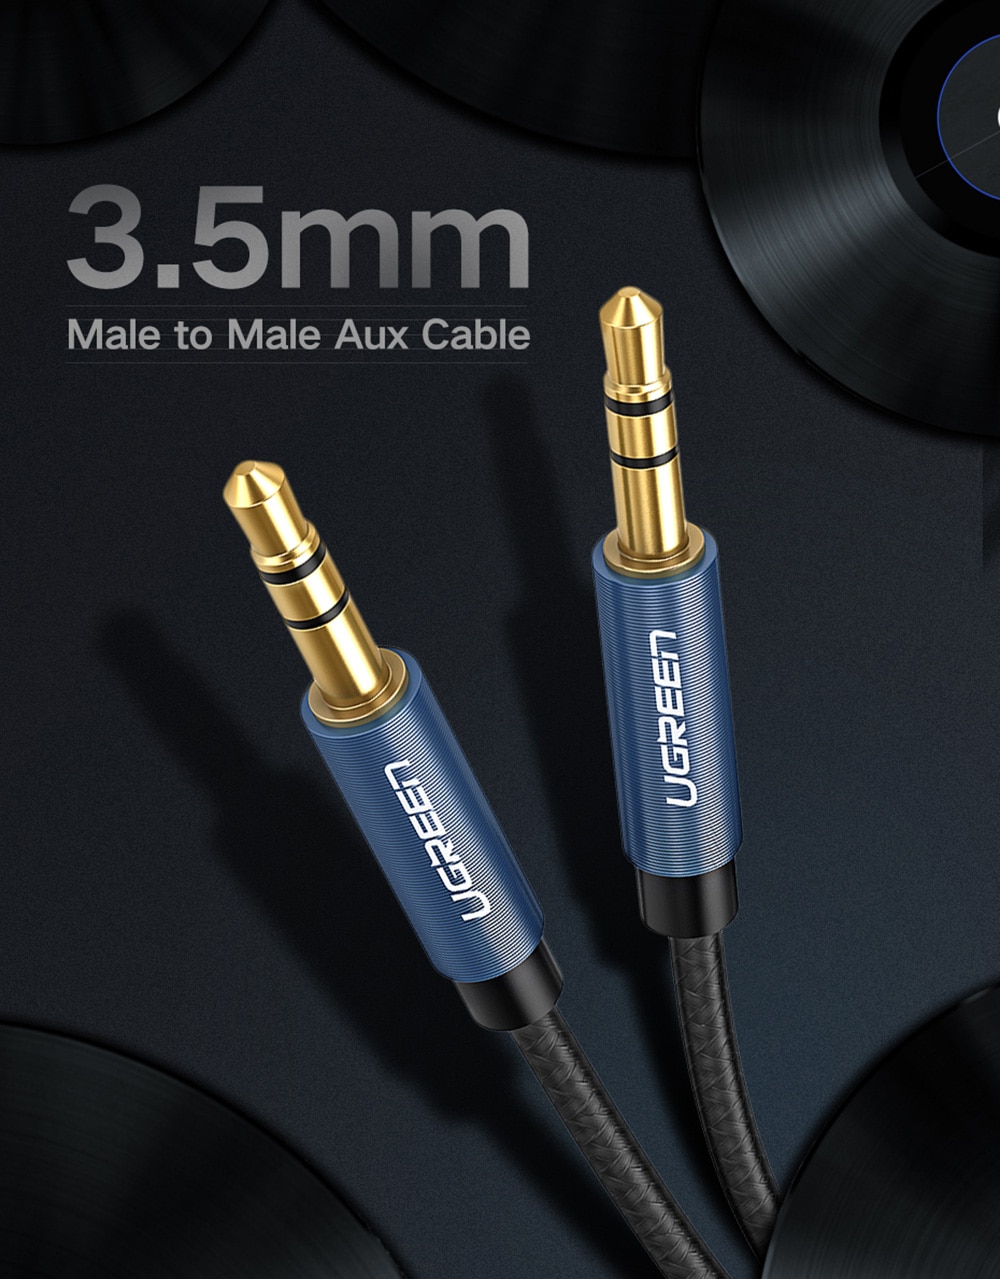 UGREEN 3.5mm Male to Male Aux Audio Cable- Black 0.5M